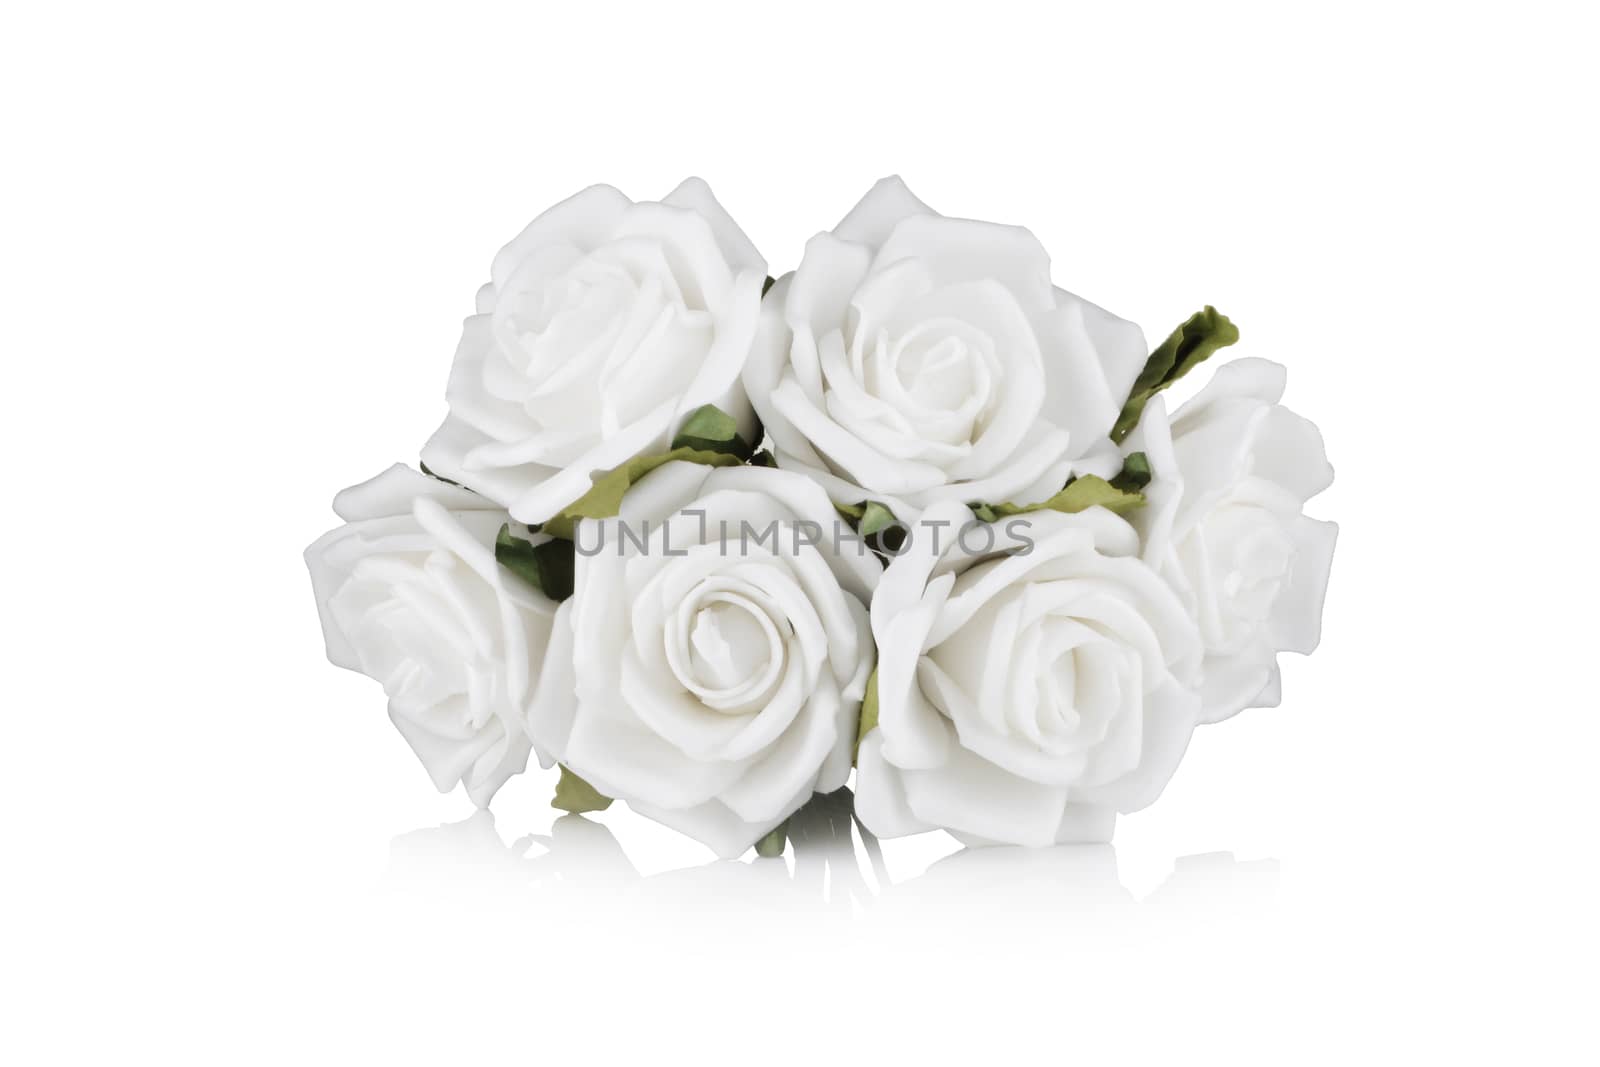 White paper roses on white background with reflection